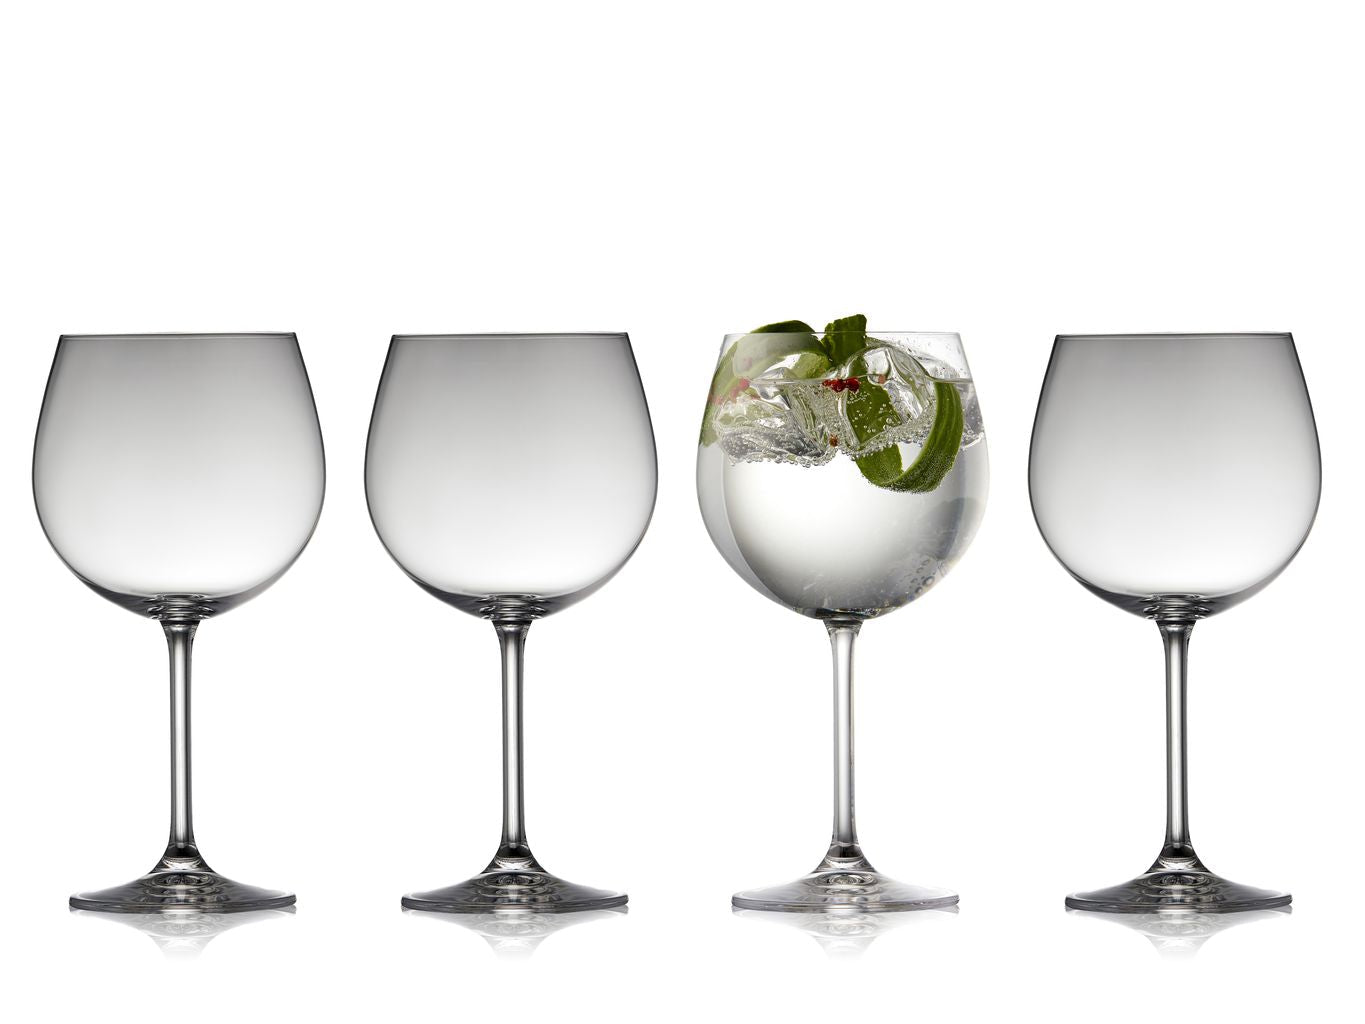 Lyngby Glas Juvel Gin & Tonic Glass 57 Cl, 4 PC.